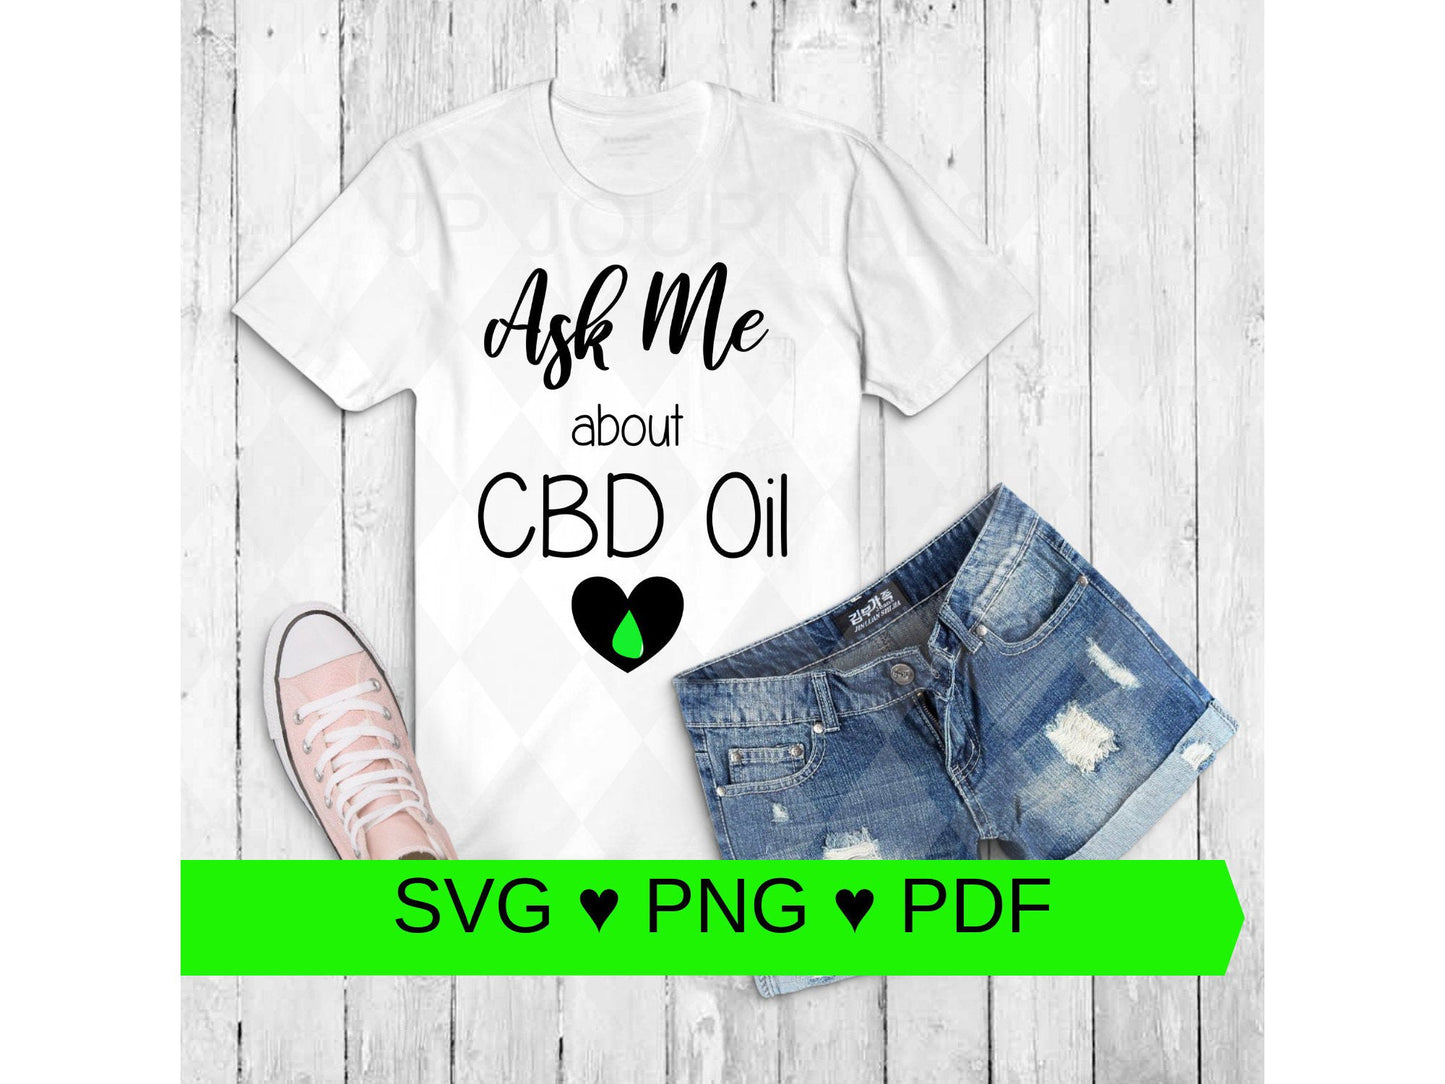 Ask Me About CBD Oil Clip Art - Business Marketing and Promotion PDF SVG